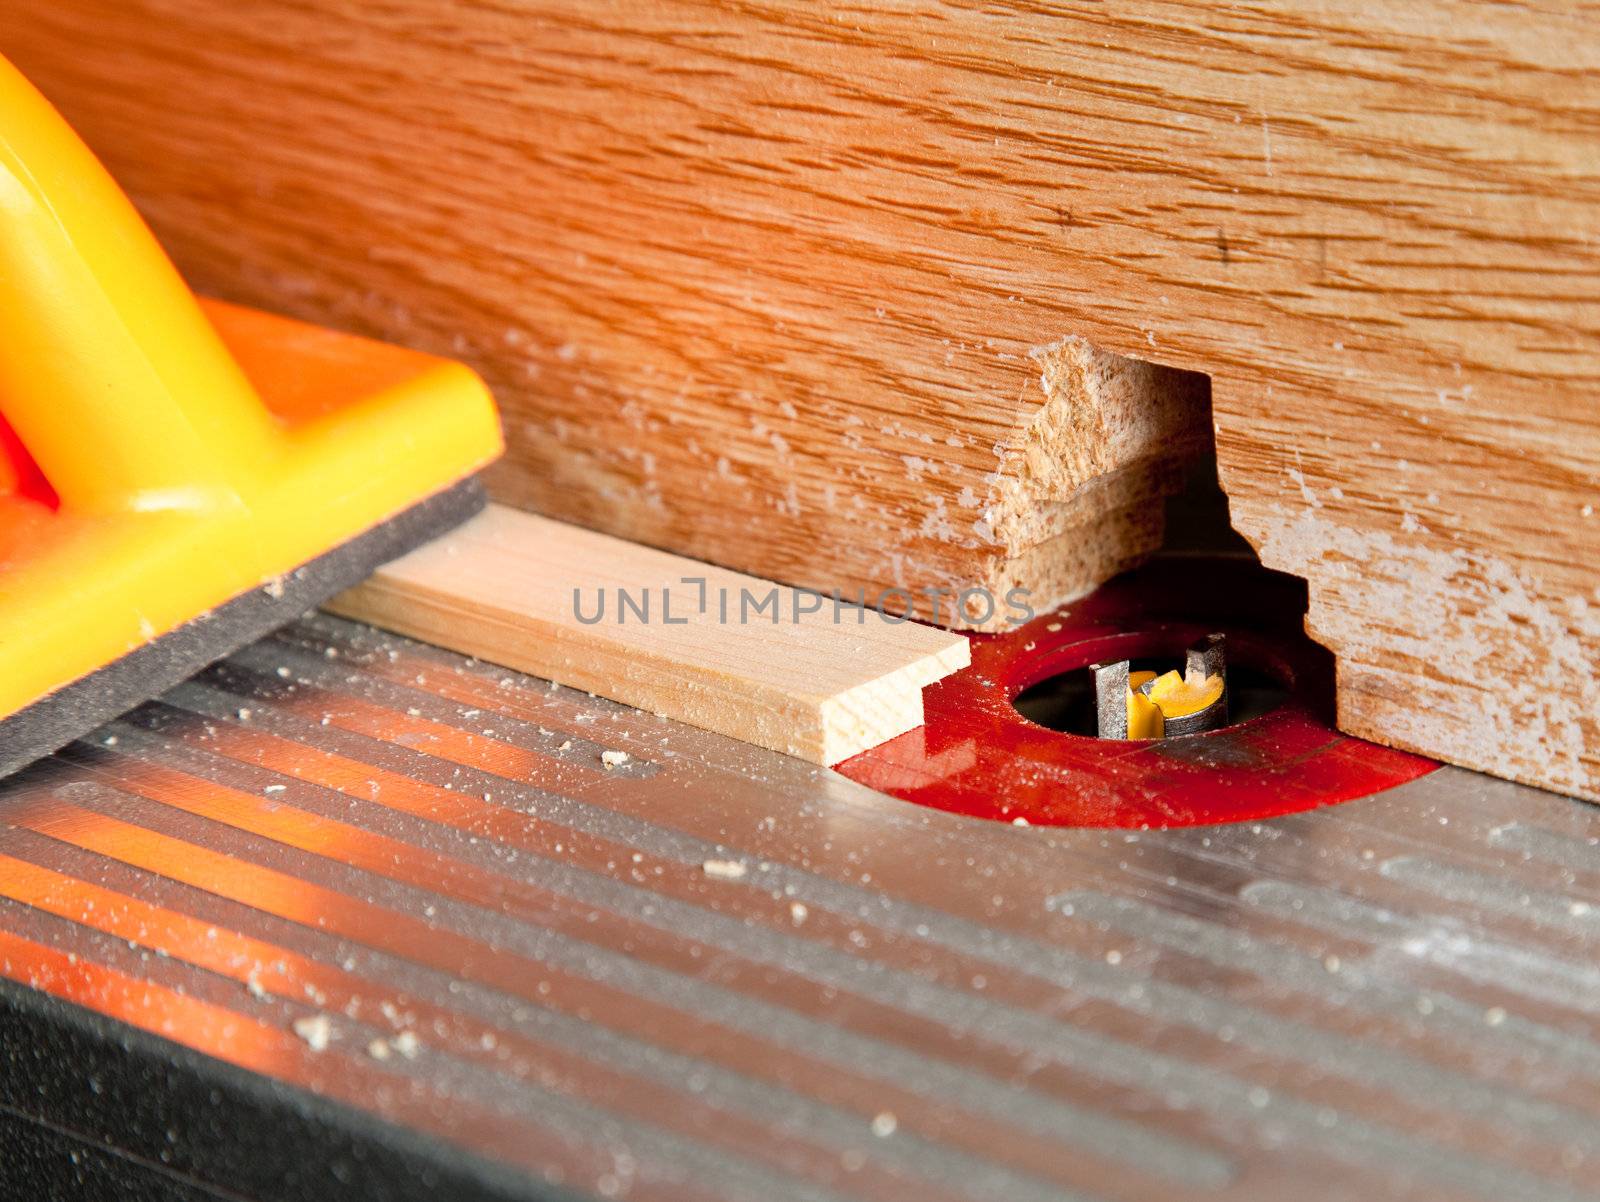 Router blade cutting rebate in strip of wood by steheap